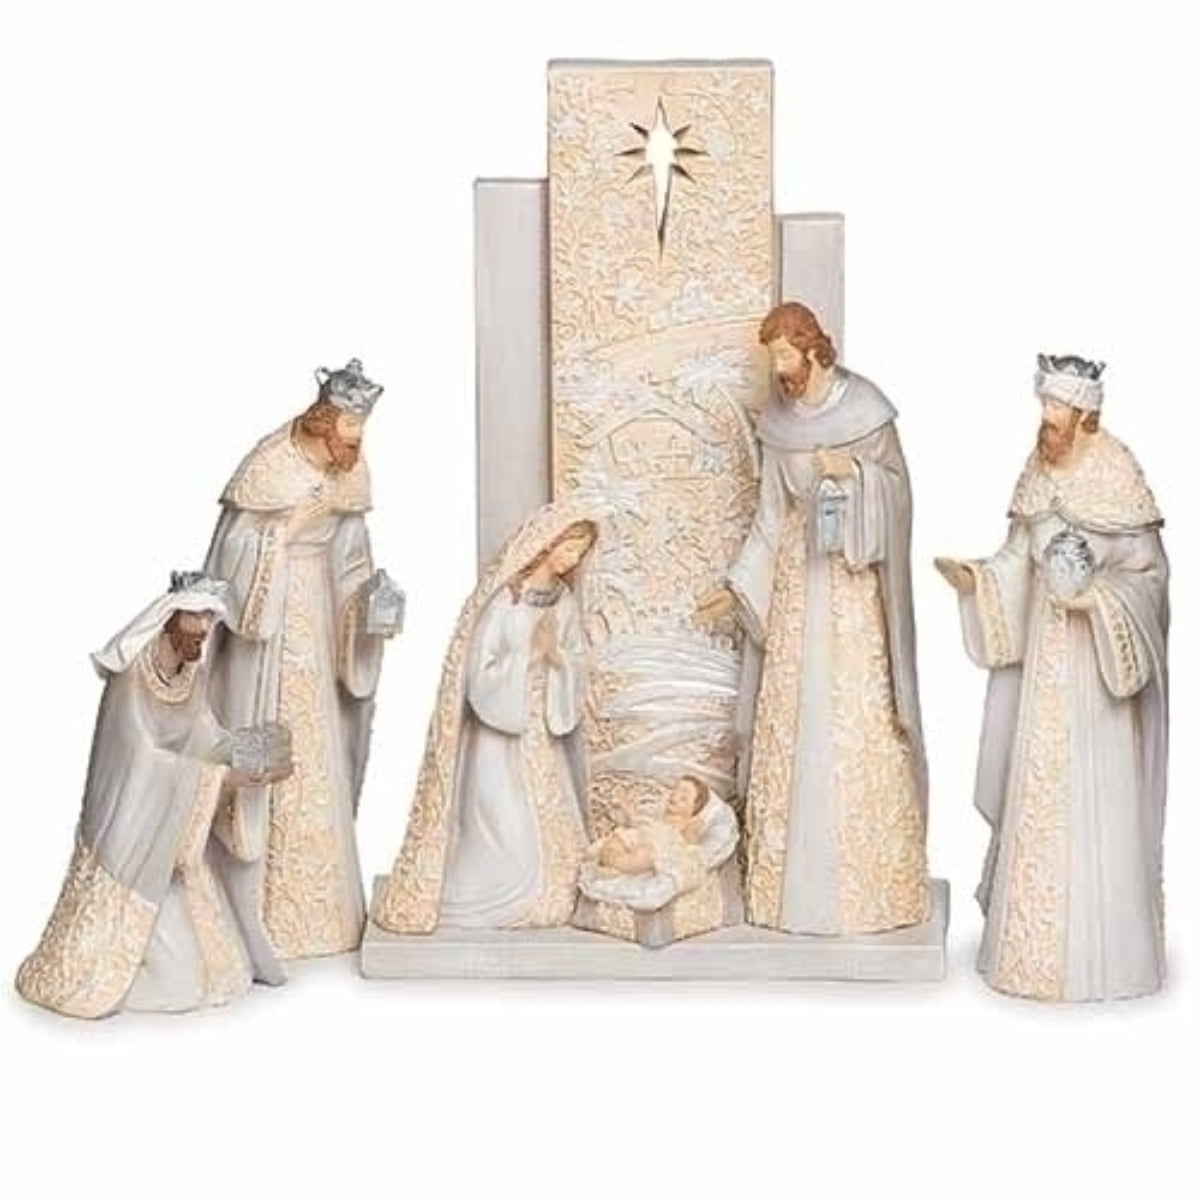 for Decoration of Your Nativity Scene Dimensions:13.5 X 8.5 CM Gesar Set of 7 Christmas Nativity Figures 7 Pieces Resin Christmas Nativity Scene 